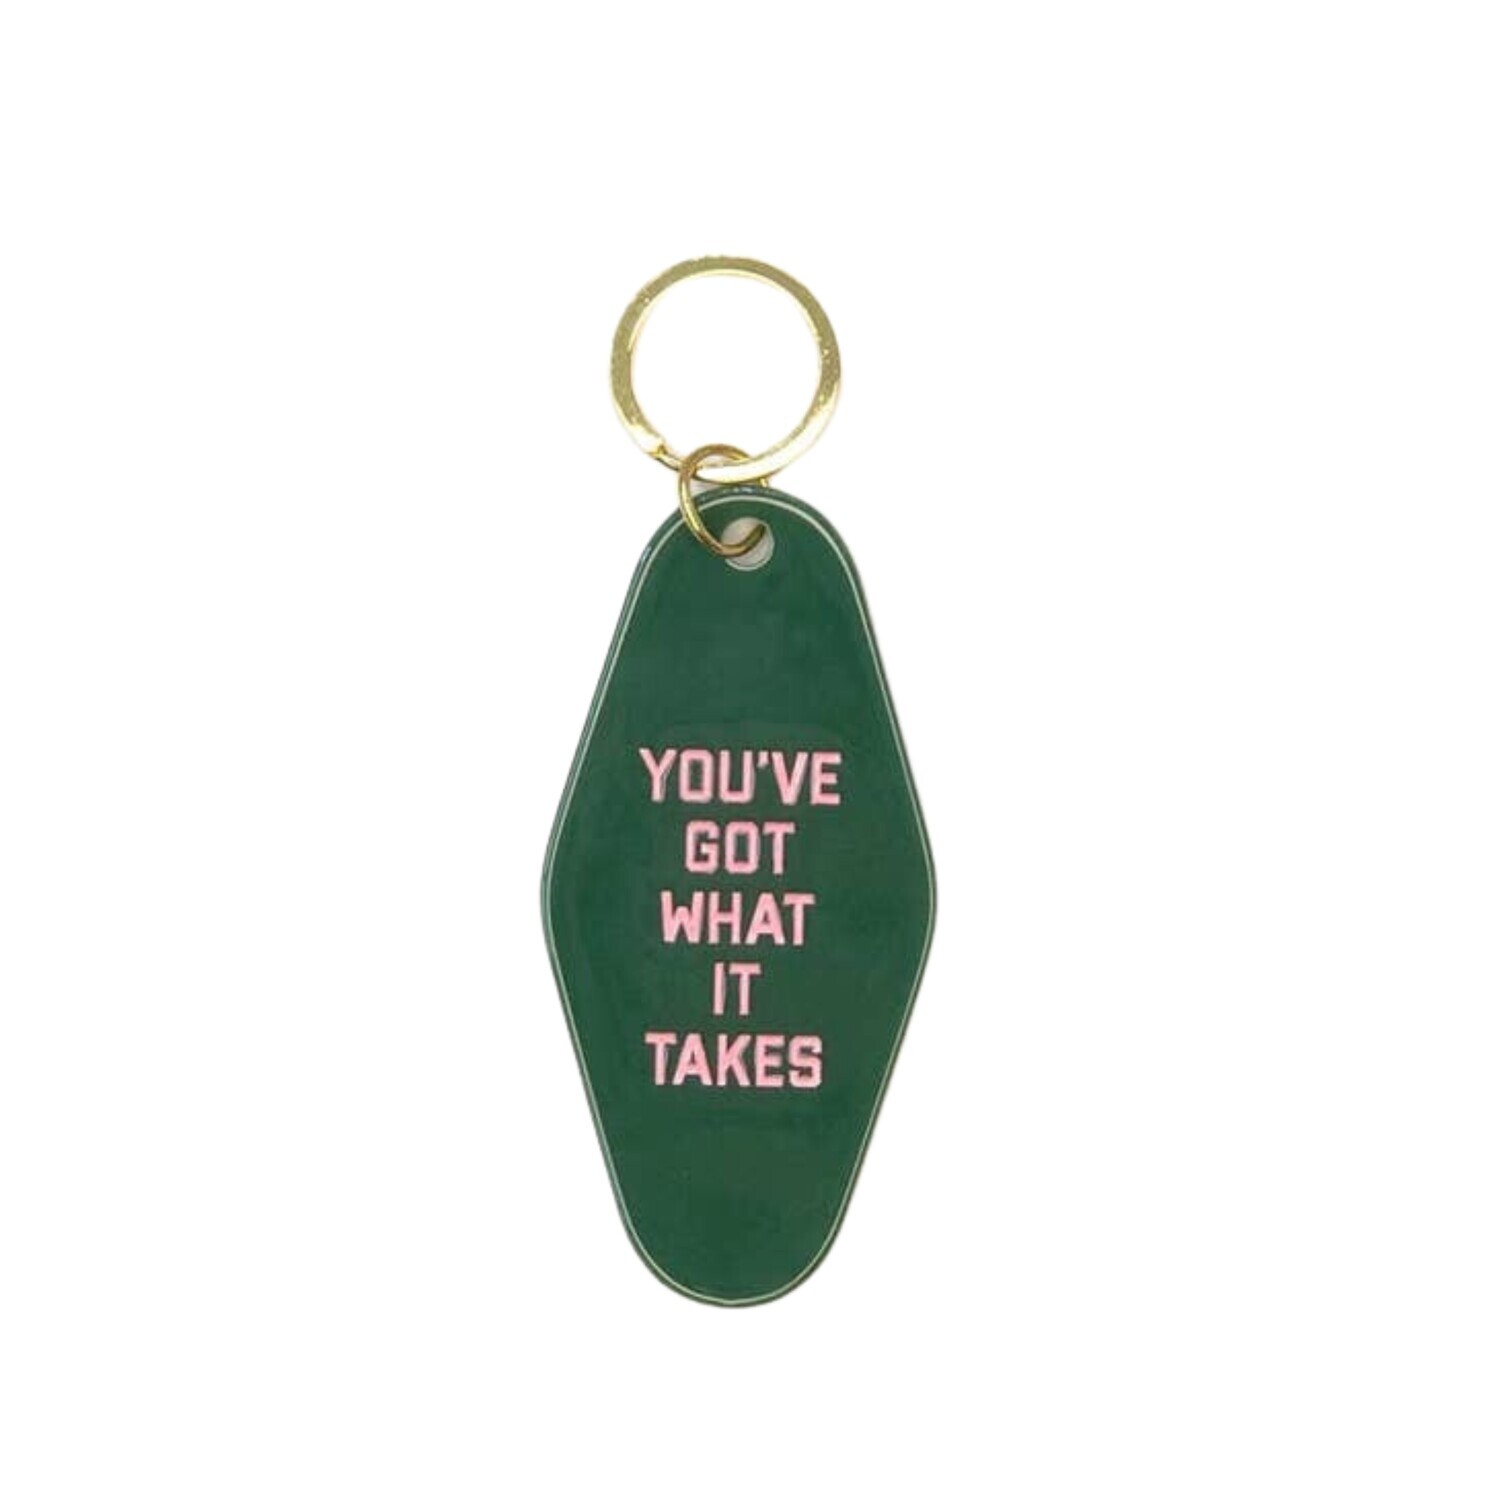 YOU'VE GOT WHAT IT TAKES MOTEL KEYCHAIN